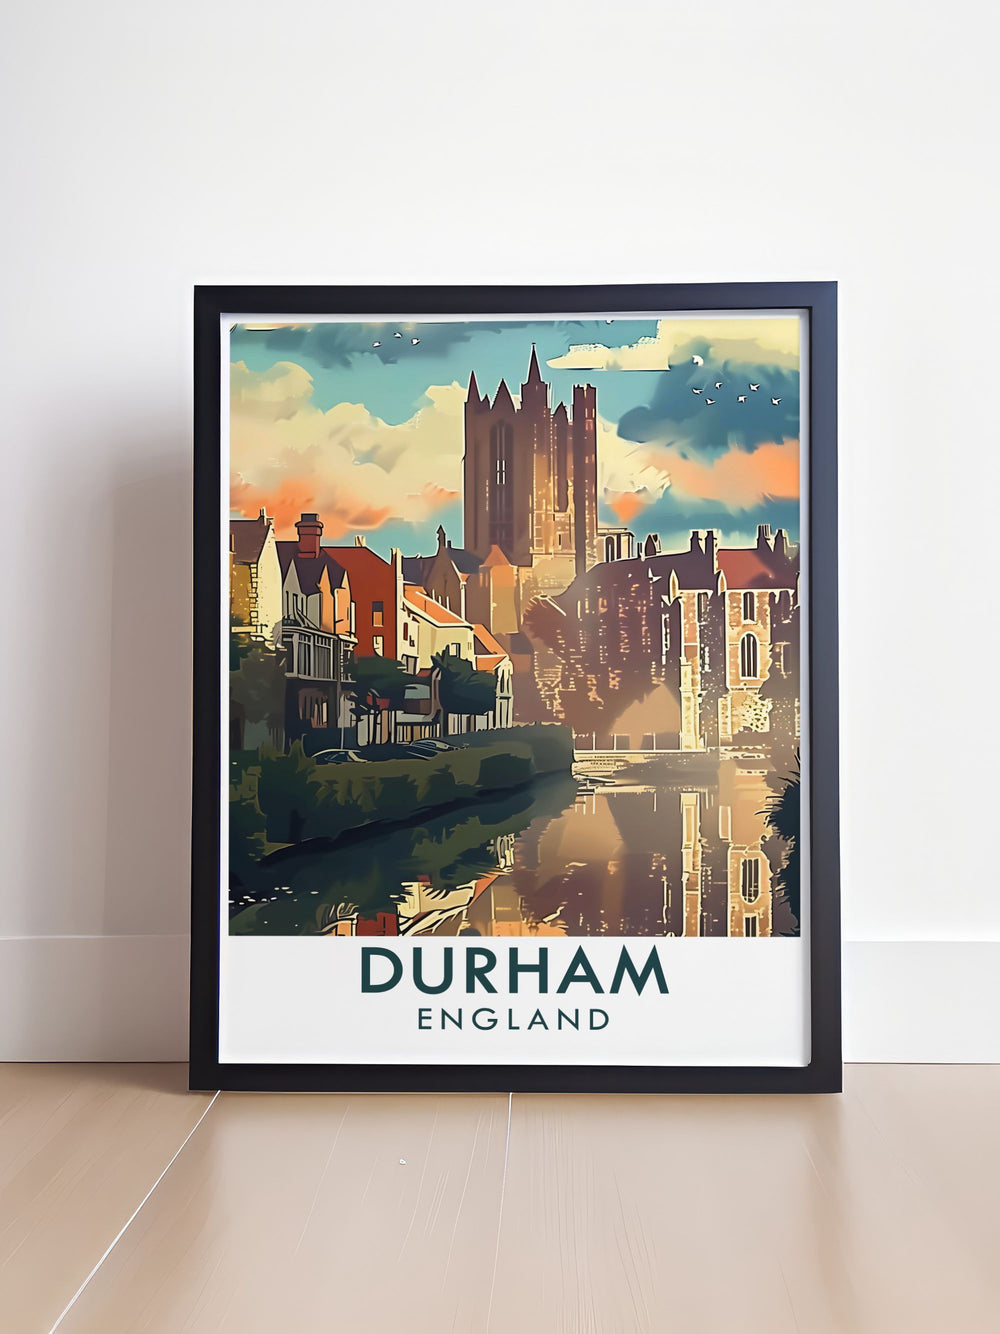 This Durham travel poster features the historic Durham Cathedral and its picturesque surroundings, making it an ideal piece for those who love exploring Englands architectural heritage.